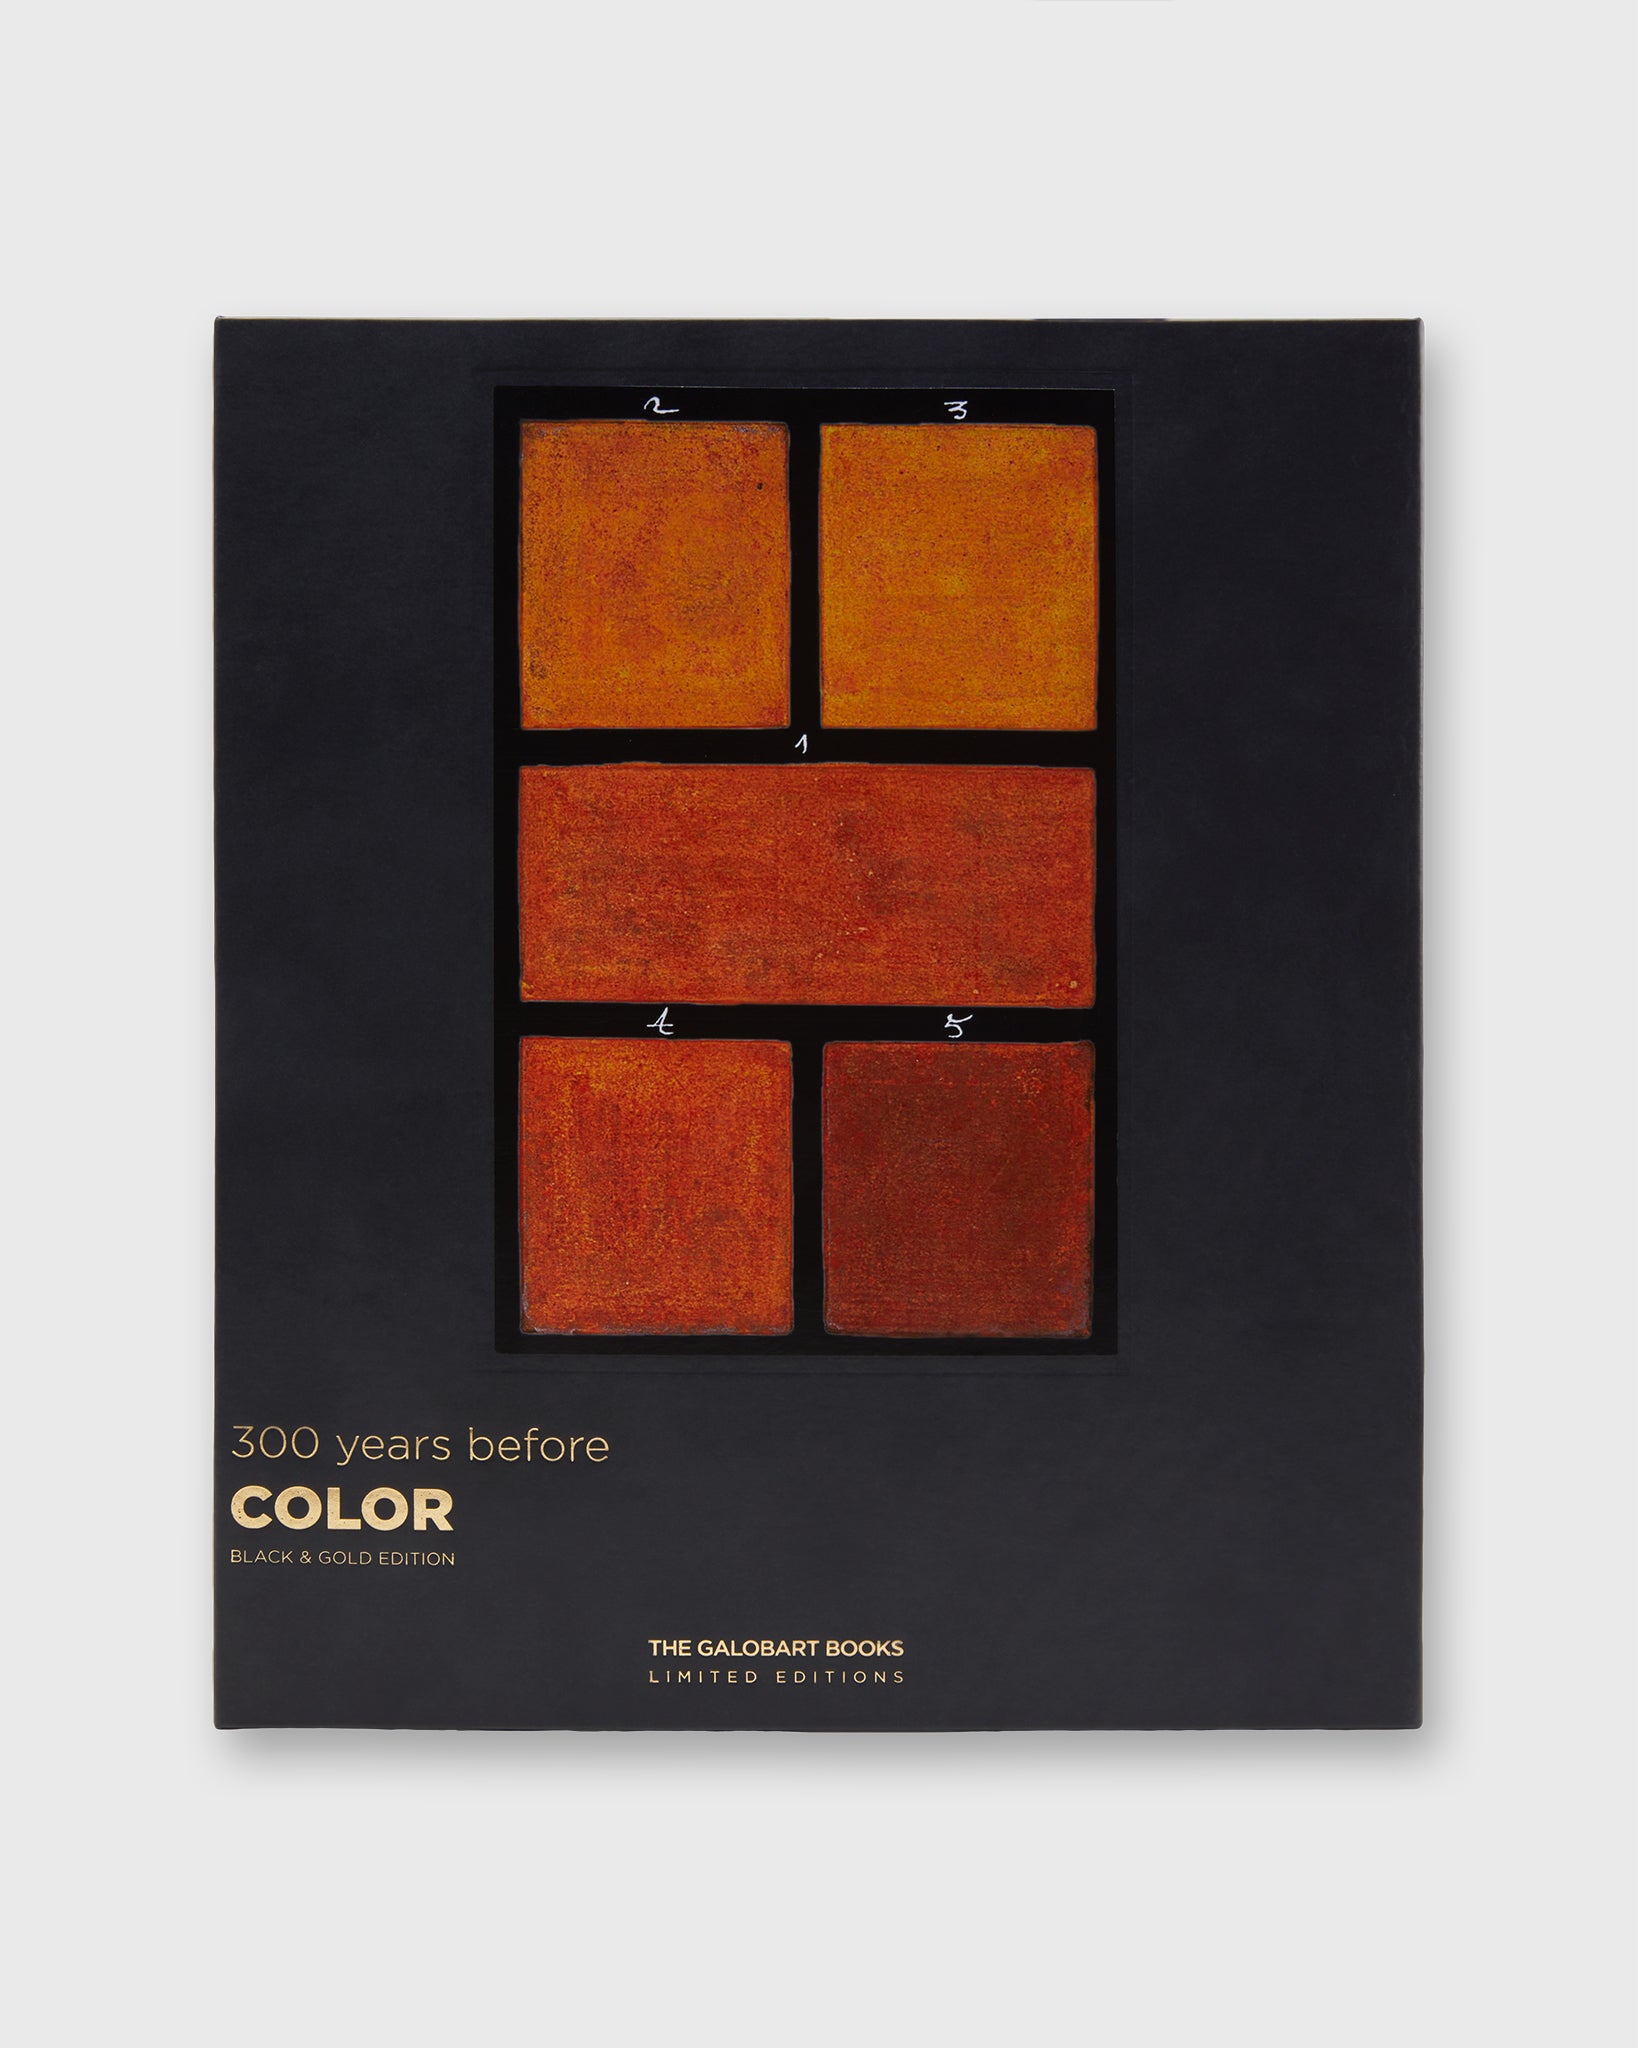 300 Years Before Color (Black & Gold Edition) - A. Boogert